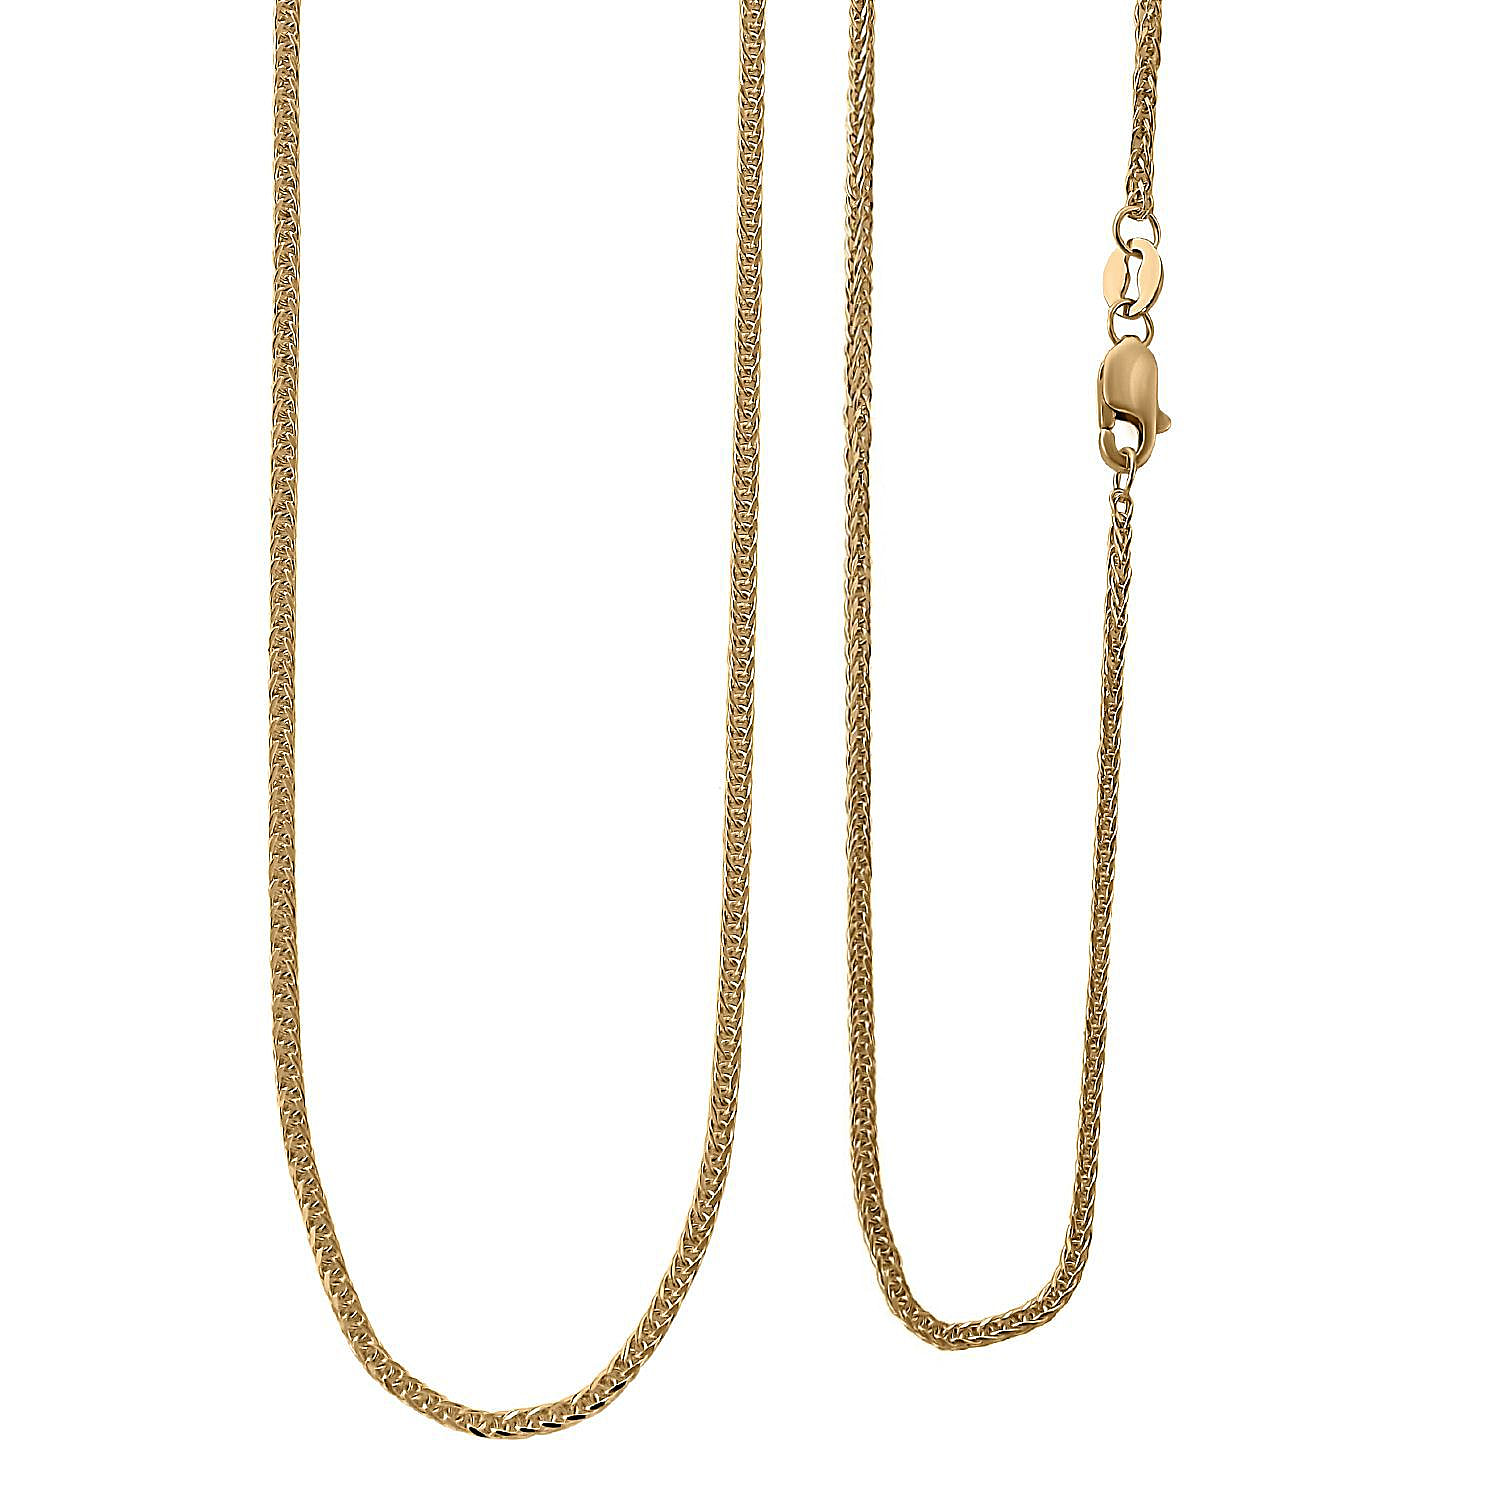 One Time Closeout -- 9K Yellow Gold SPIGA Necklace (Size - 20)